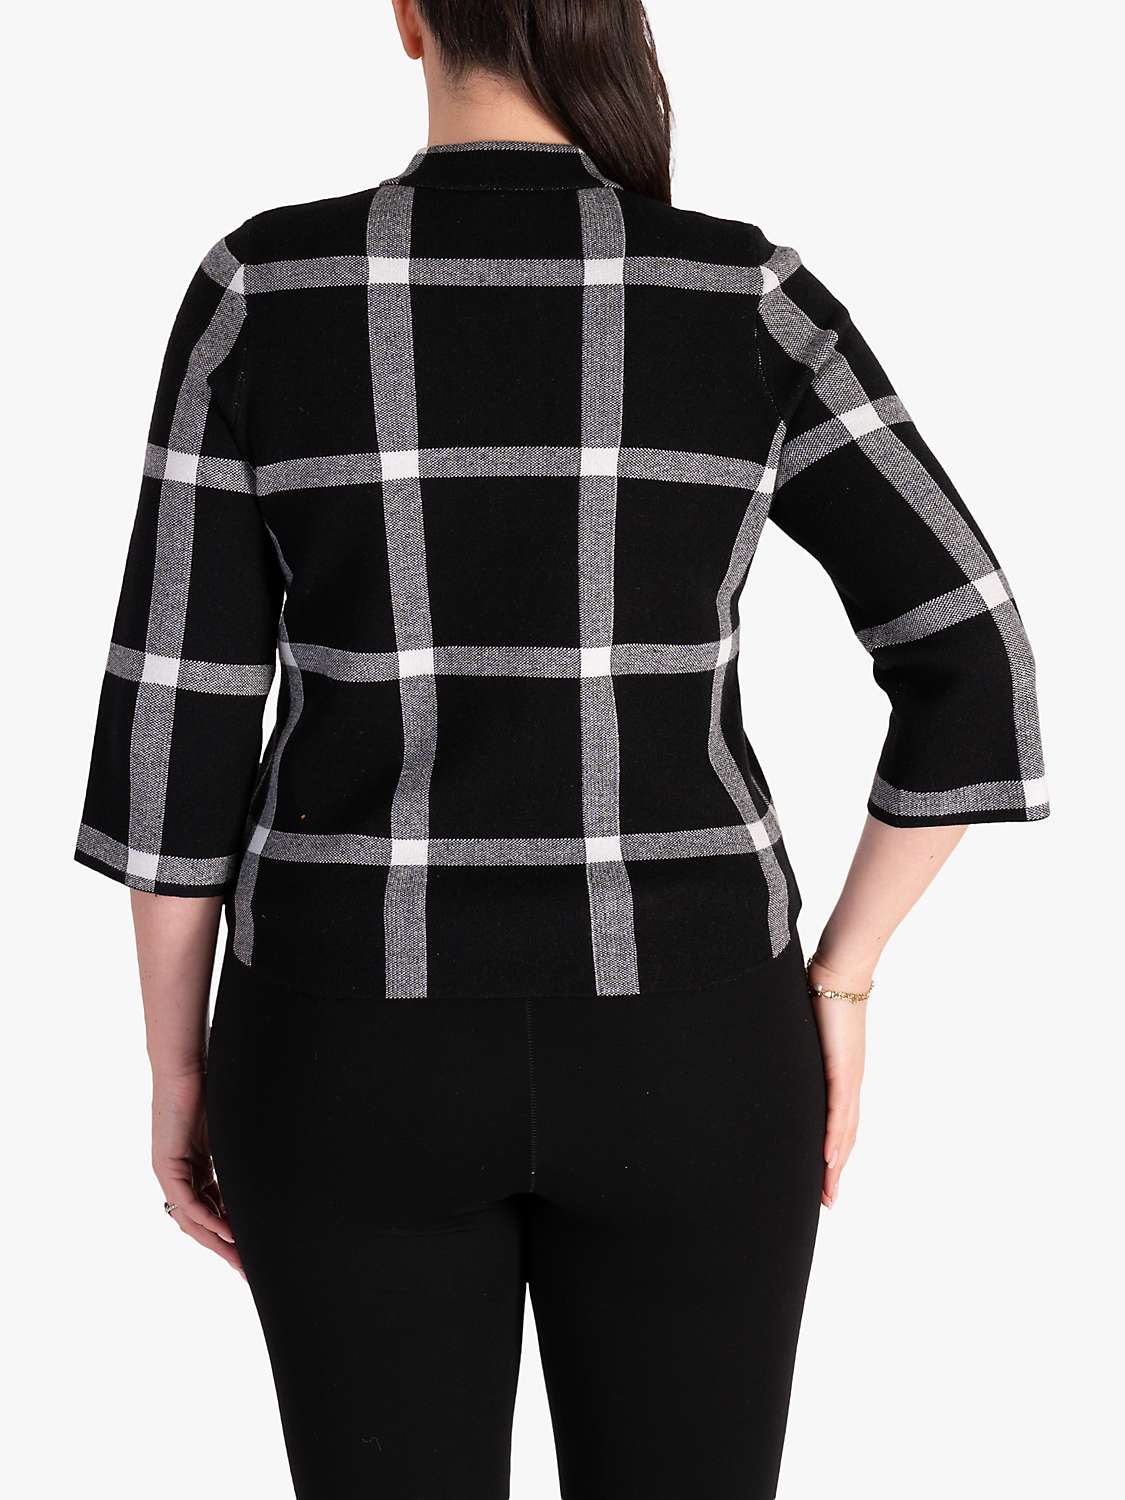 Buy chesca  3/4 Sleeve Check Jacket, Black/Ivory Online at johnlewis.com